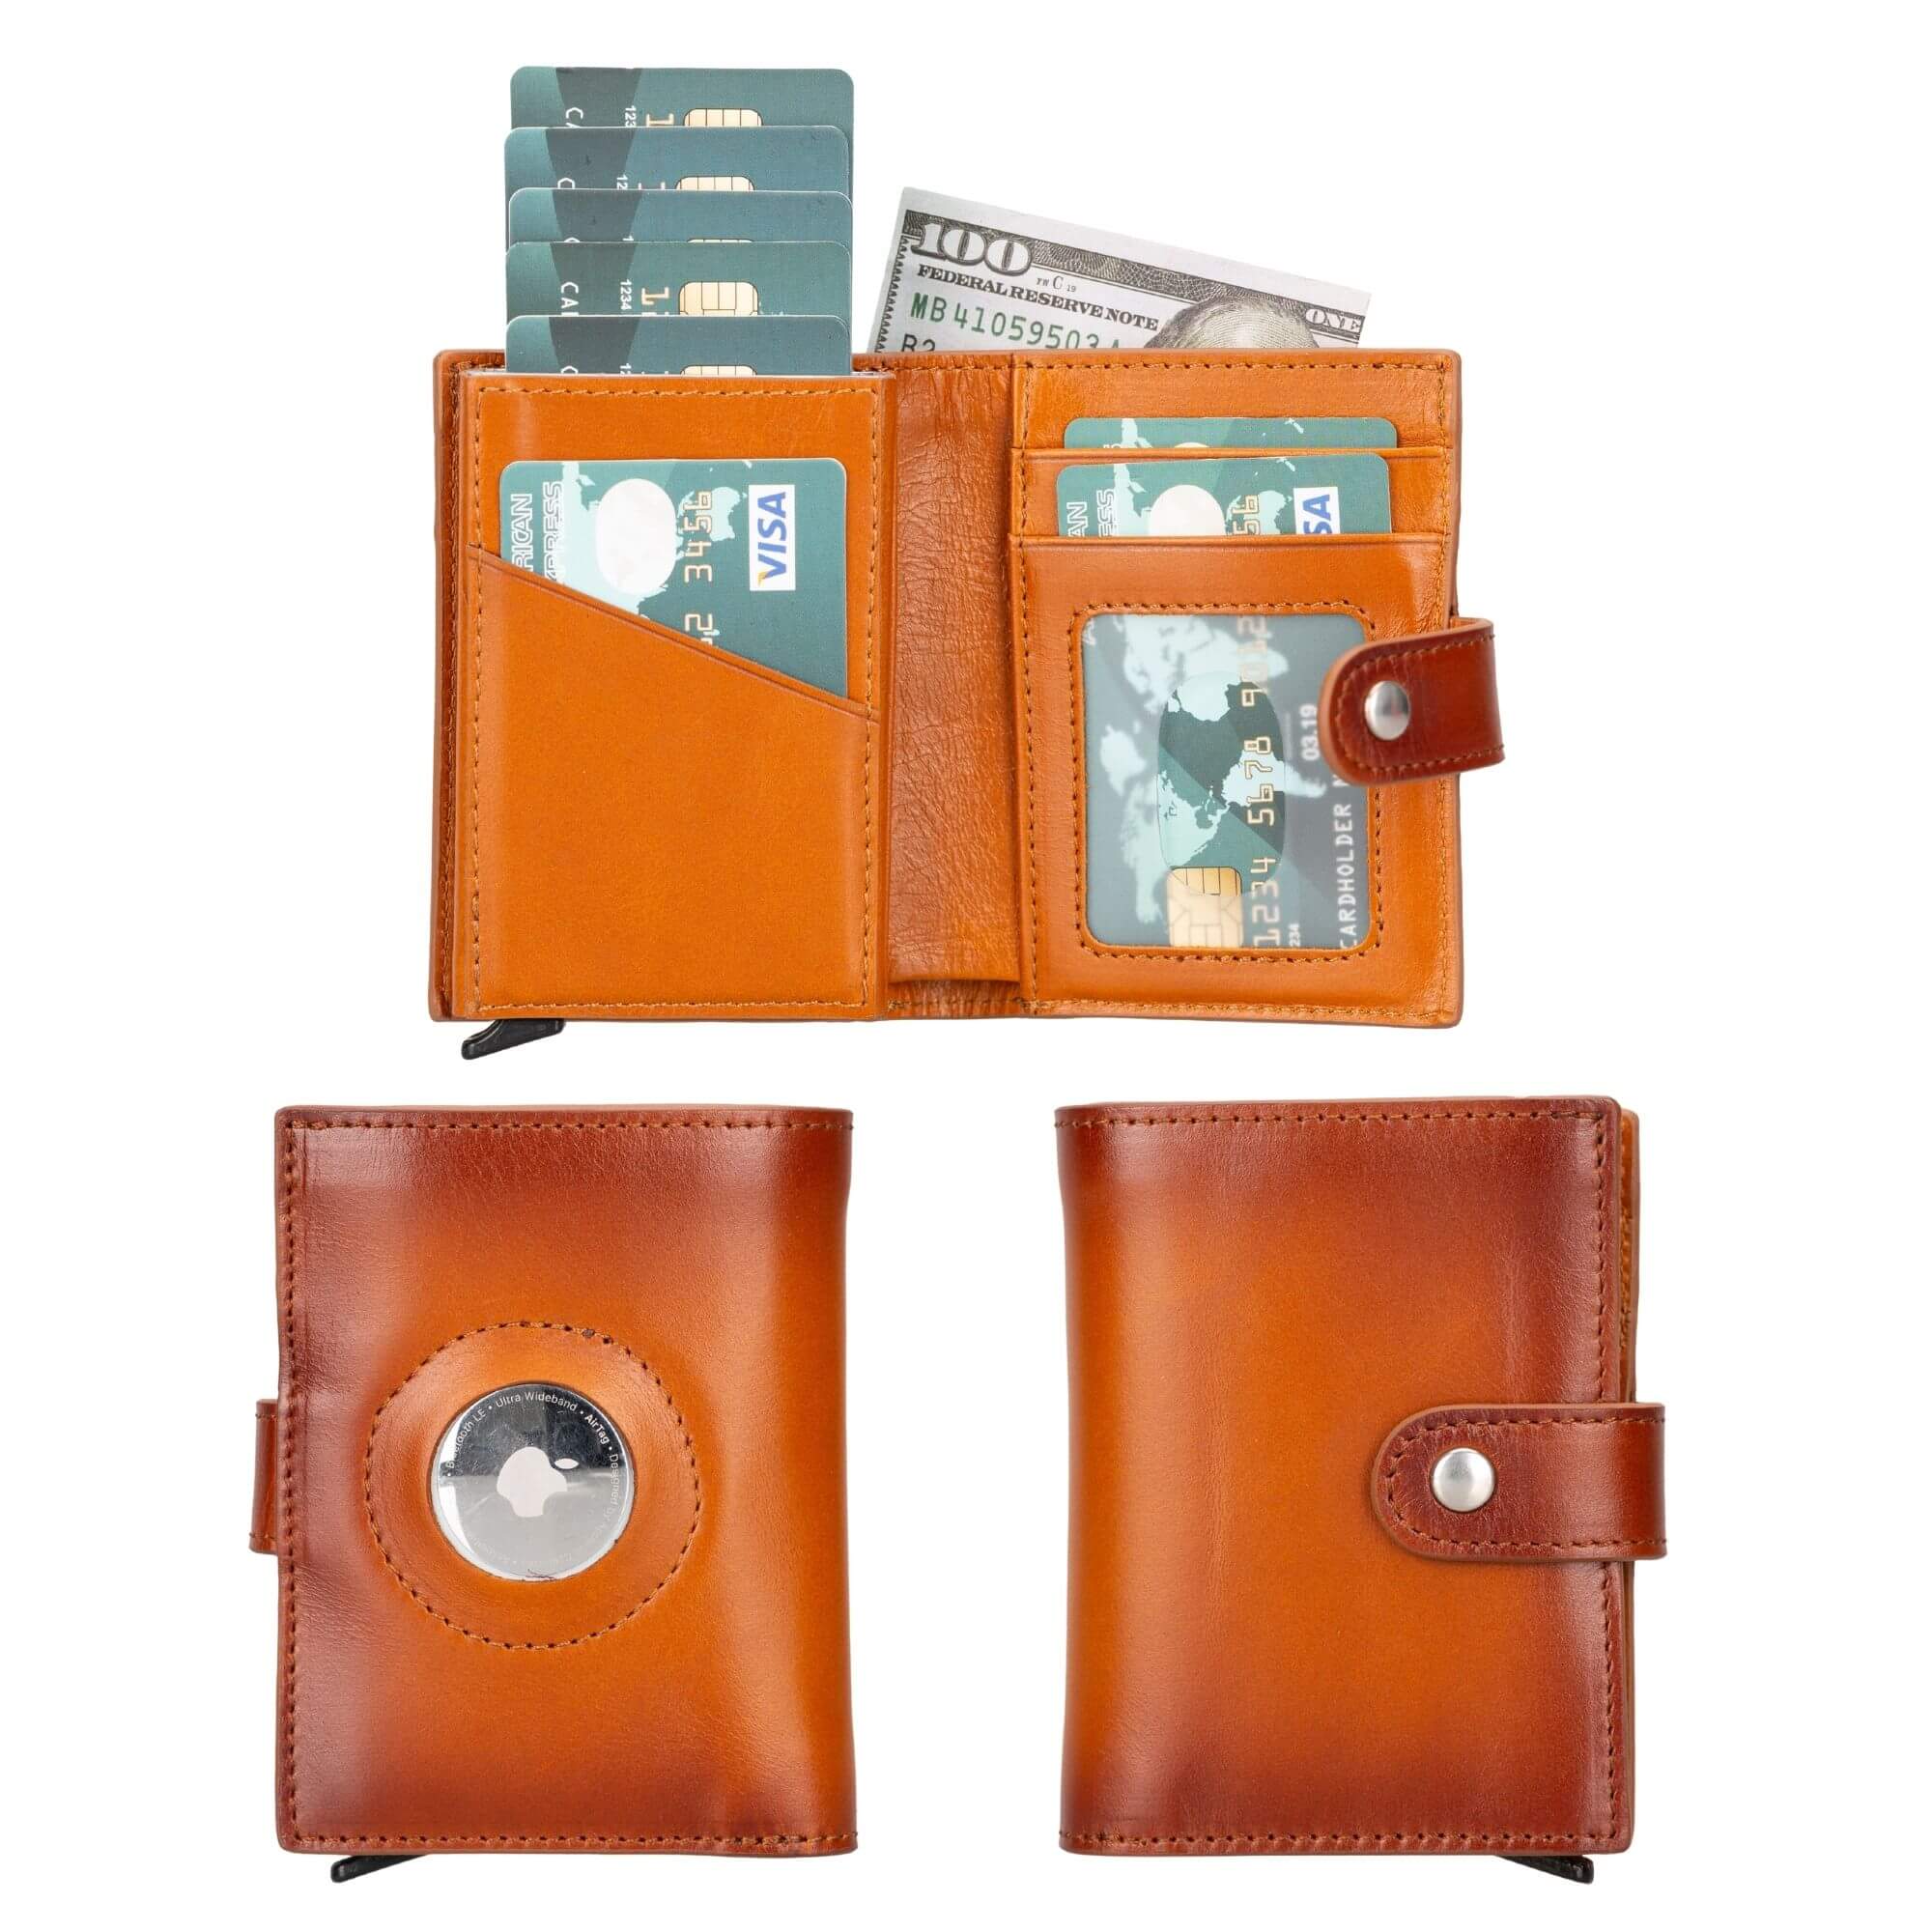 Douglas Leather Pop-Up Cardholder with Compatible Apple AirTag - Tan - TORONATA